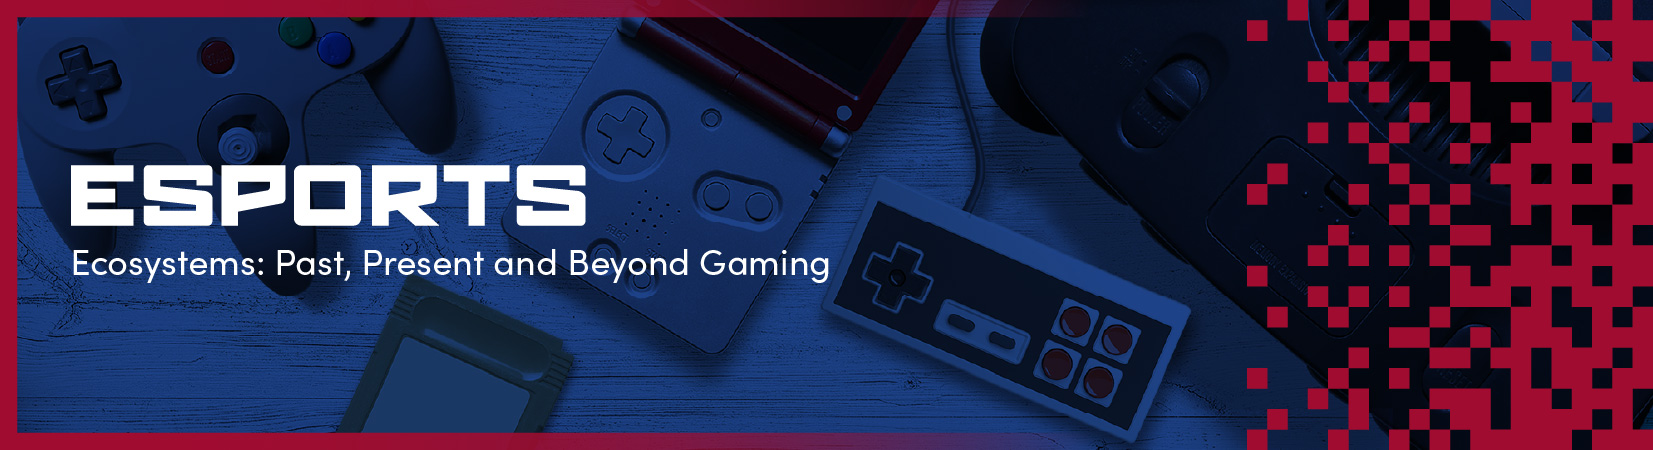 Esports Ecosystems: Past, Present, and Beyond Gaming banner